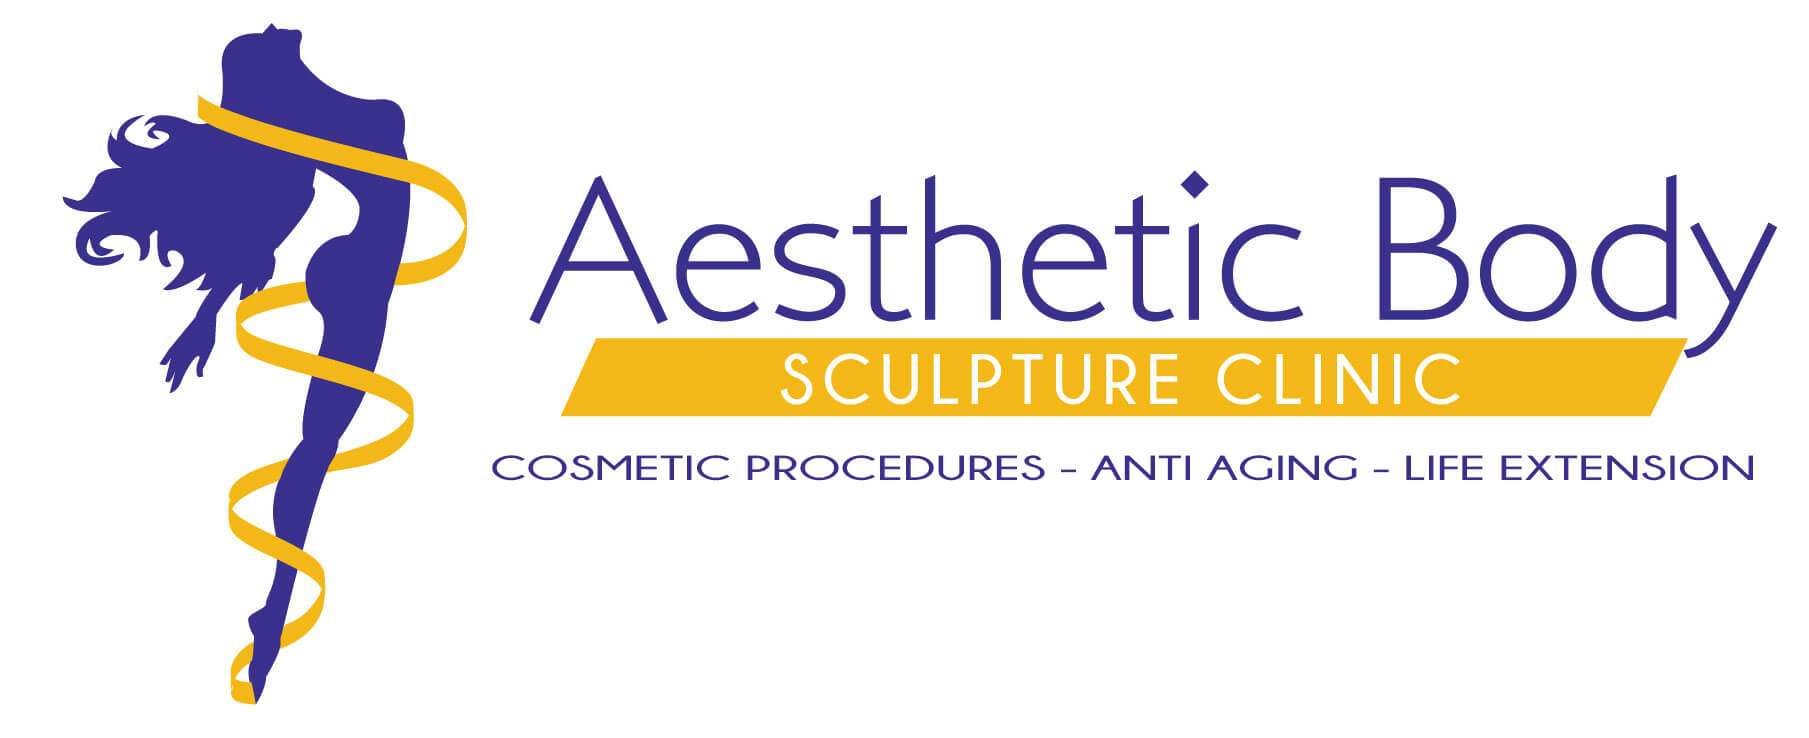 Monthly Specials - Aesthetic Body Scuplture Clinic